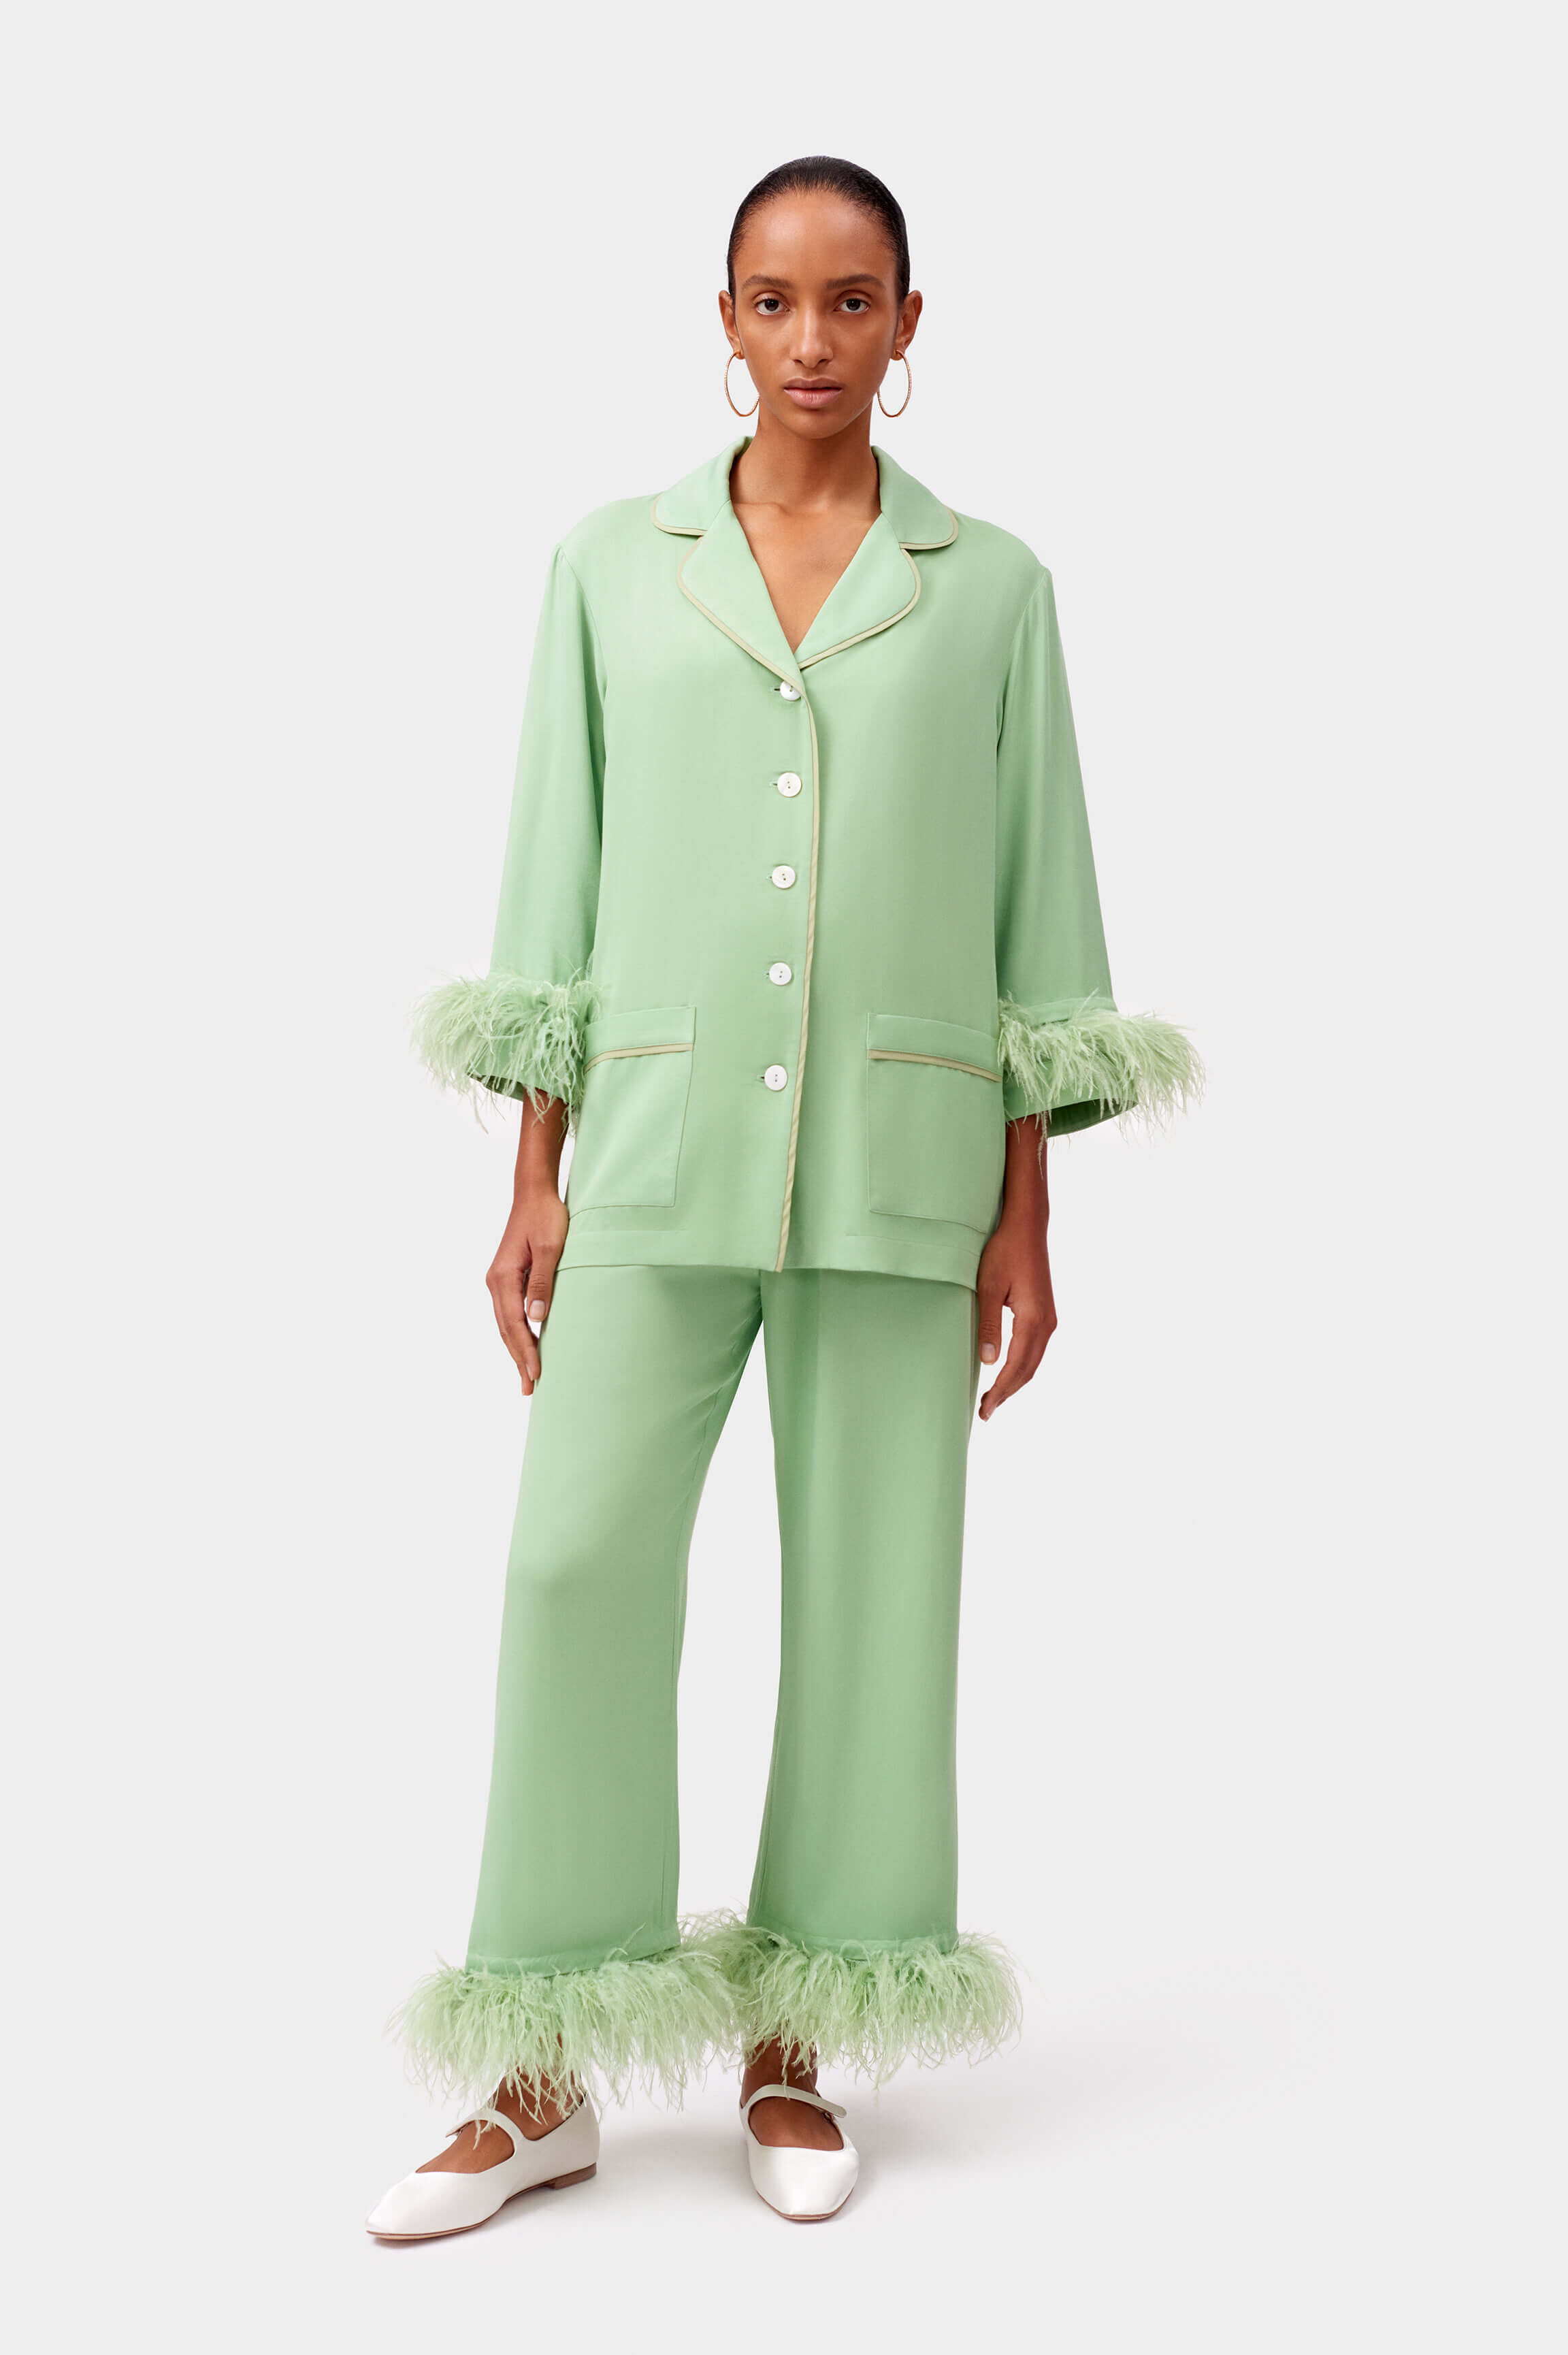 Sleeper + Party Pajamas Set With Detachable Feathers In Mint